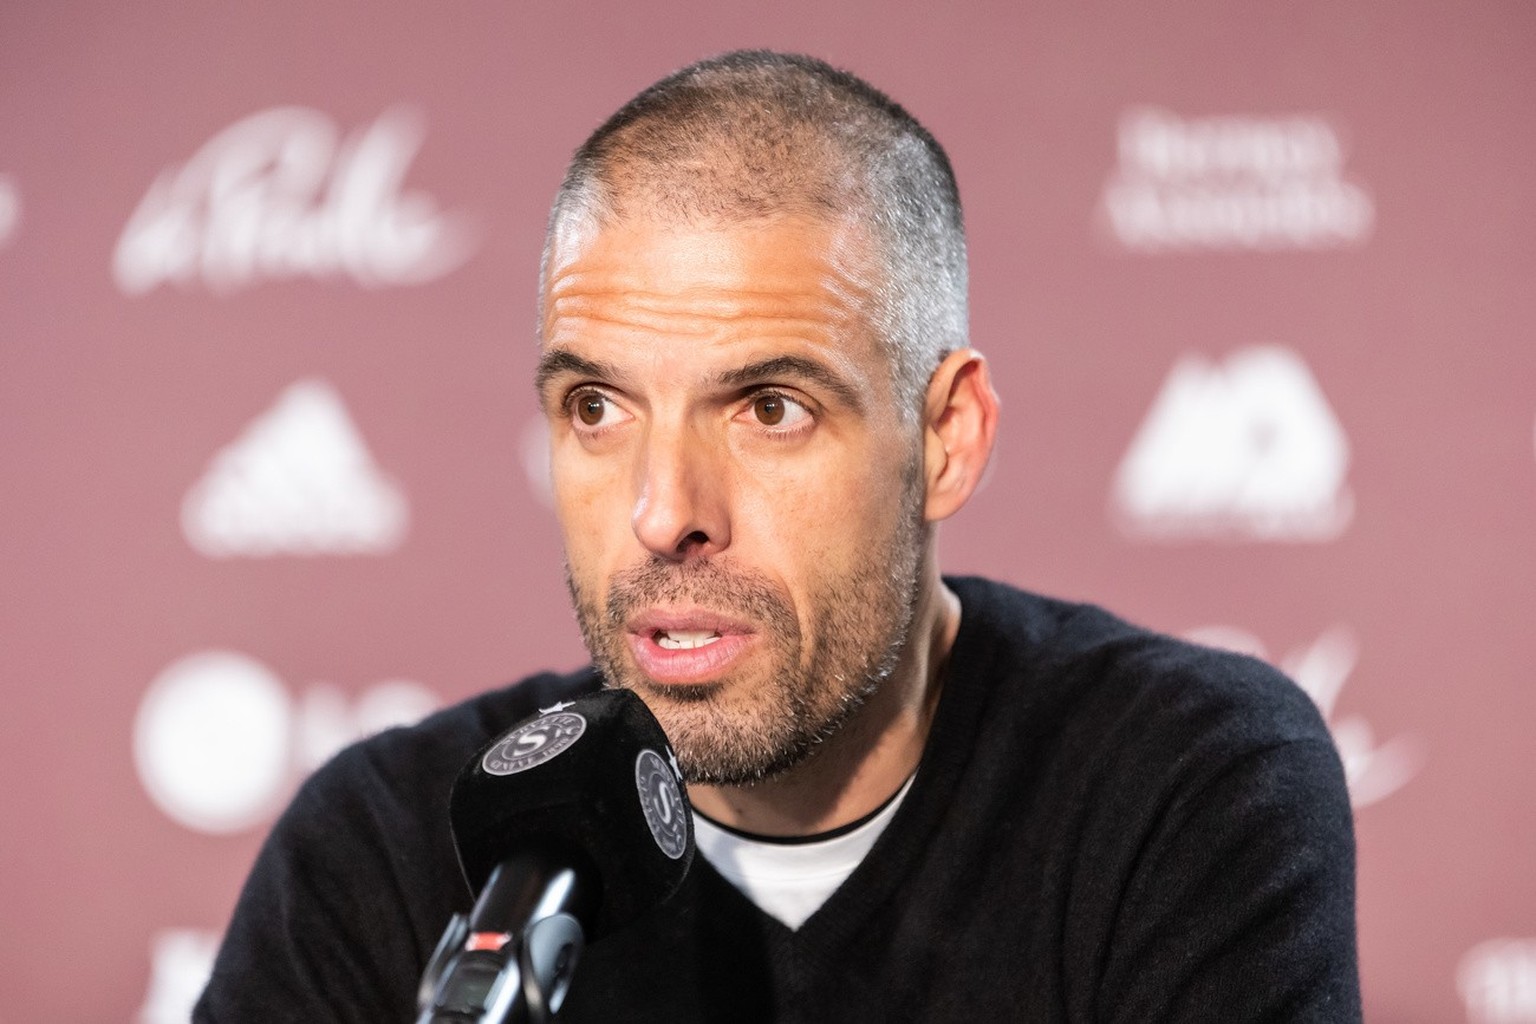 Fabio Celestini, coach of FC Sion, speaks during a press conference after the Super League soccer match of Swiss Championship between Servette FC and FC Sion, at the Stade de Geneve stadium, in Geneva ...